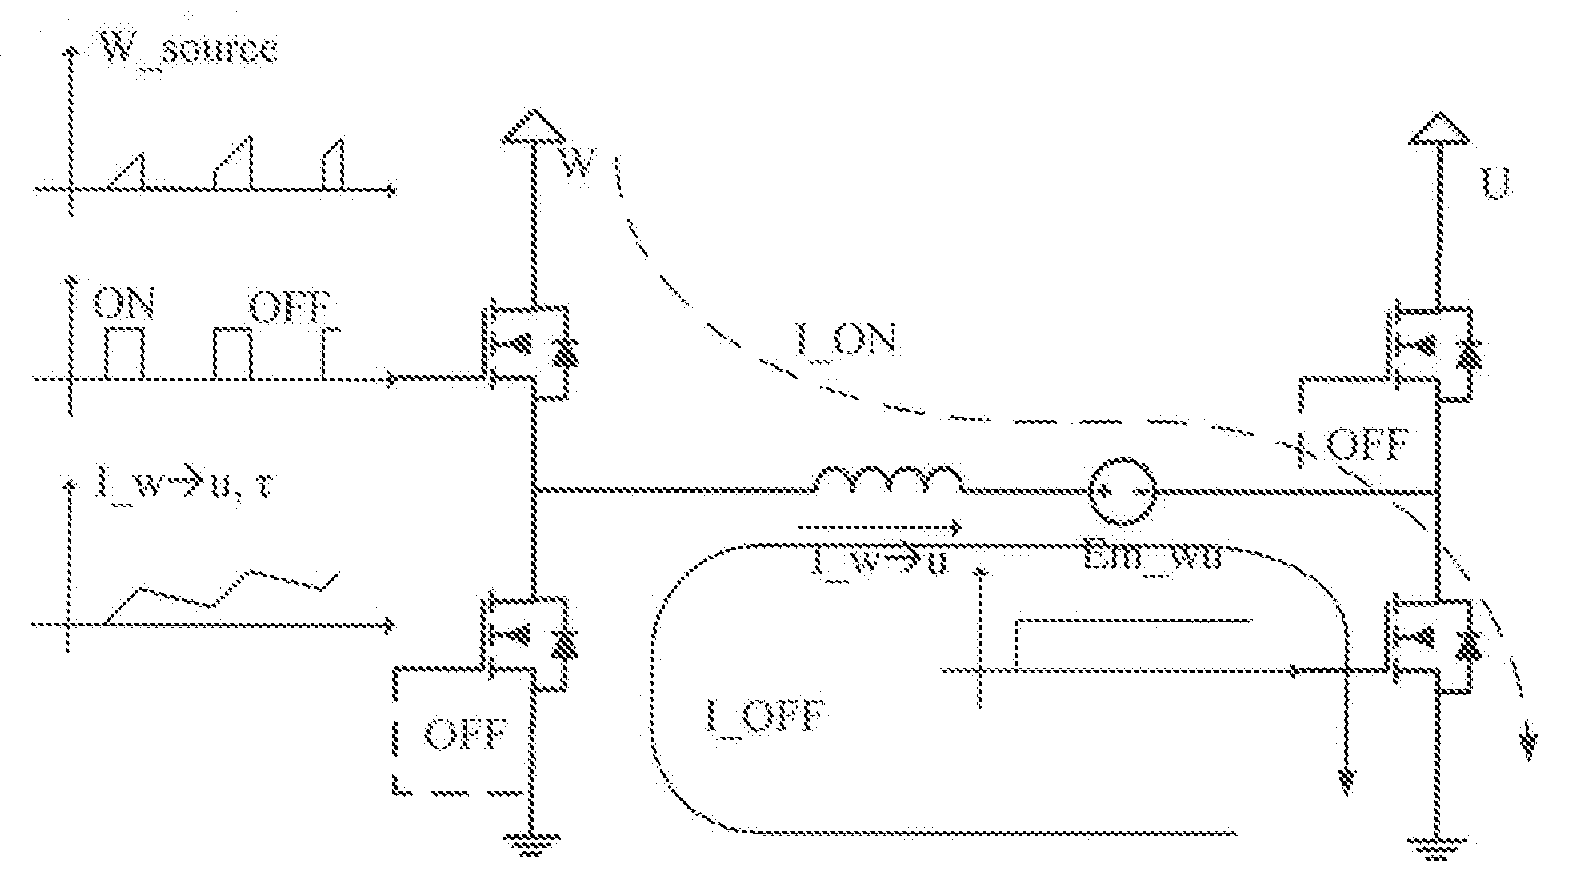 Electronic braking and energy recycling system associated with DC brushless motor